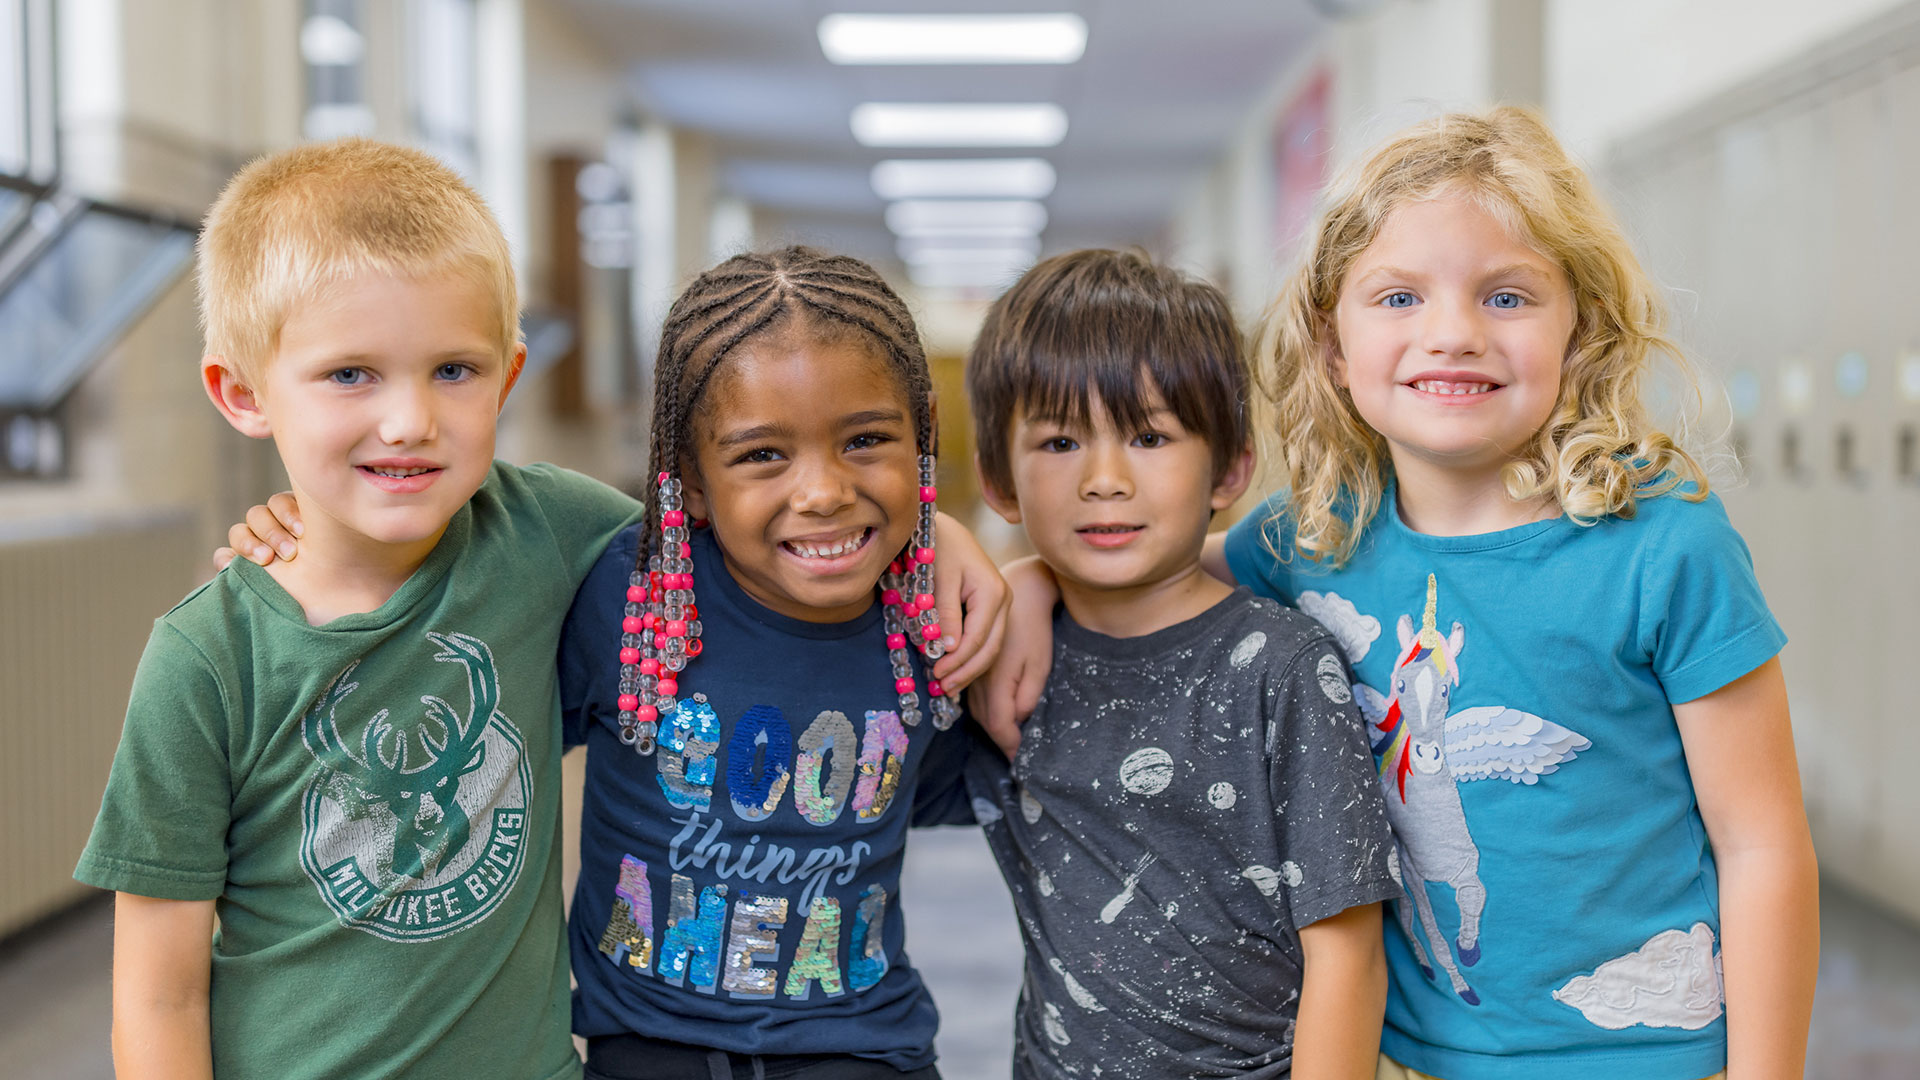 Four young children with their arms around one another in a school hallway.